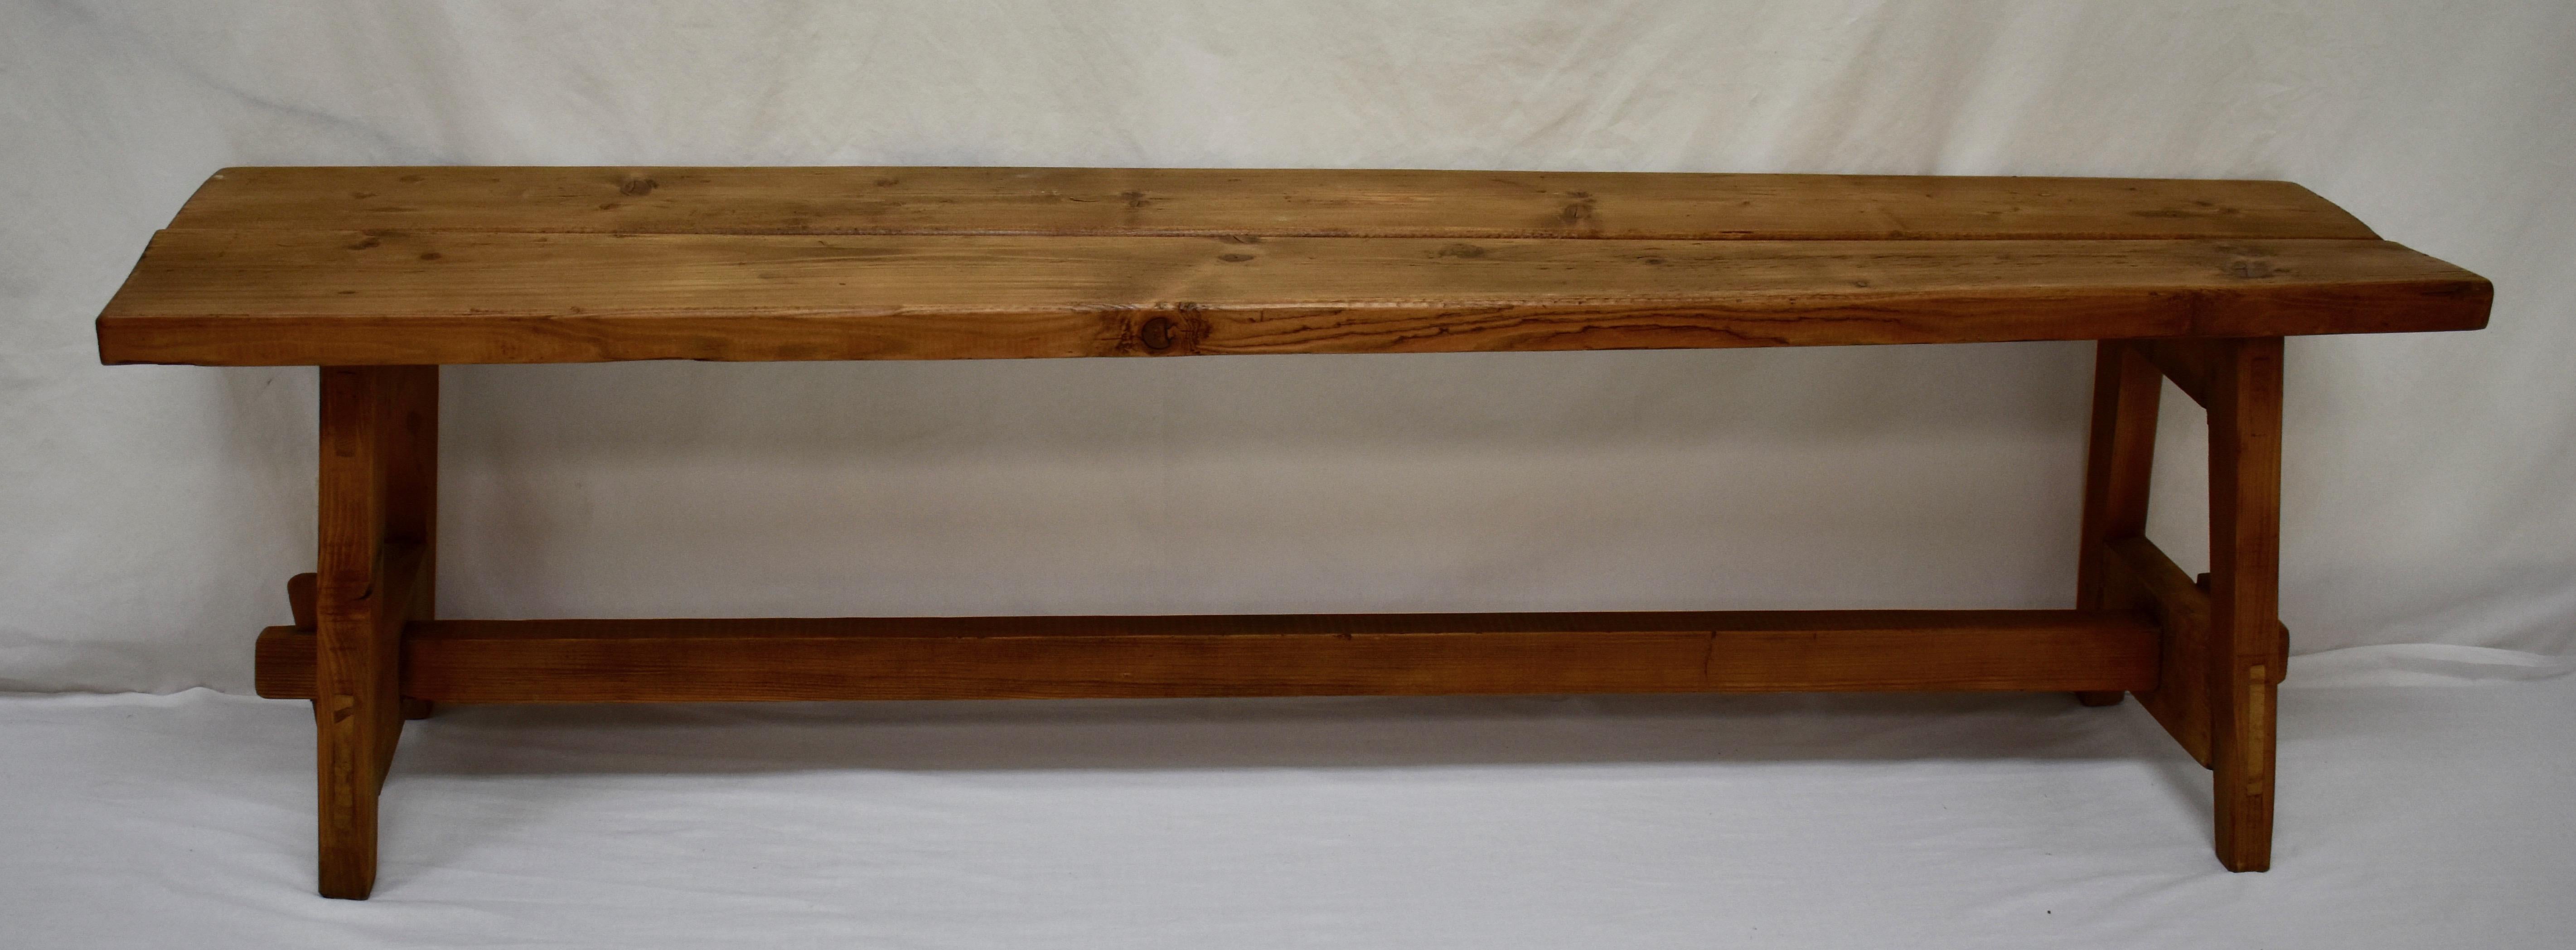 This is a rustic bench of great strength with an unusual form and a good deal of character. The members that form the splayed “A” frame trestle ends are through-tenoned for strength and stability, mortised into the underside of the top boards and